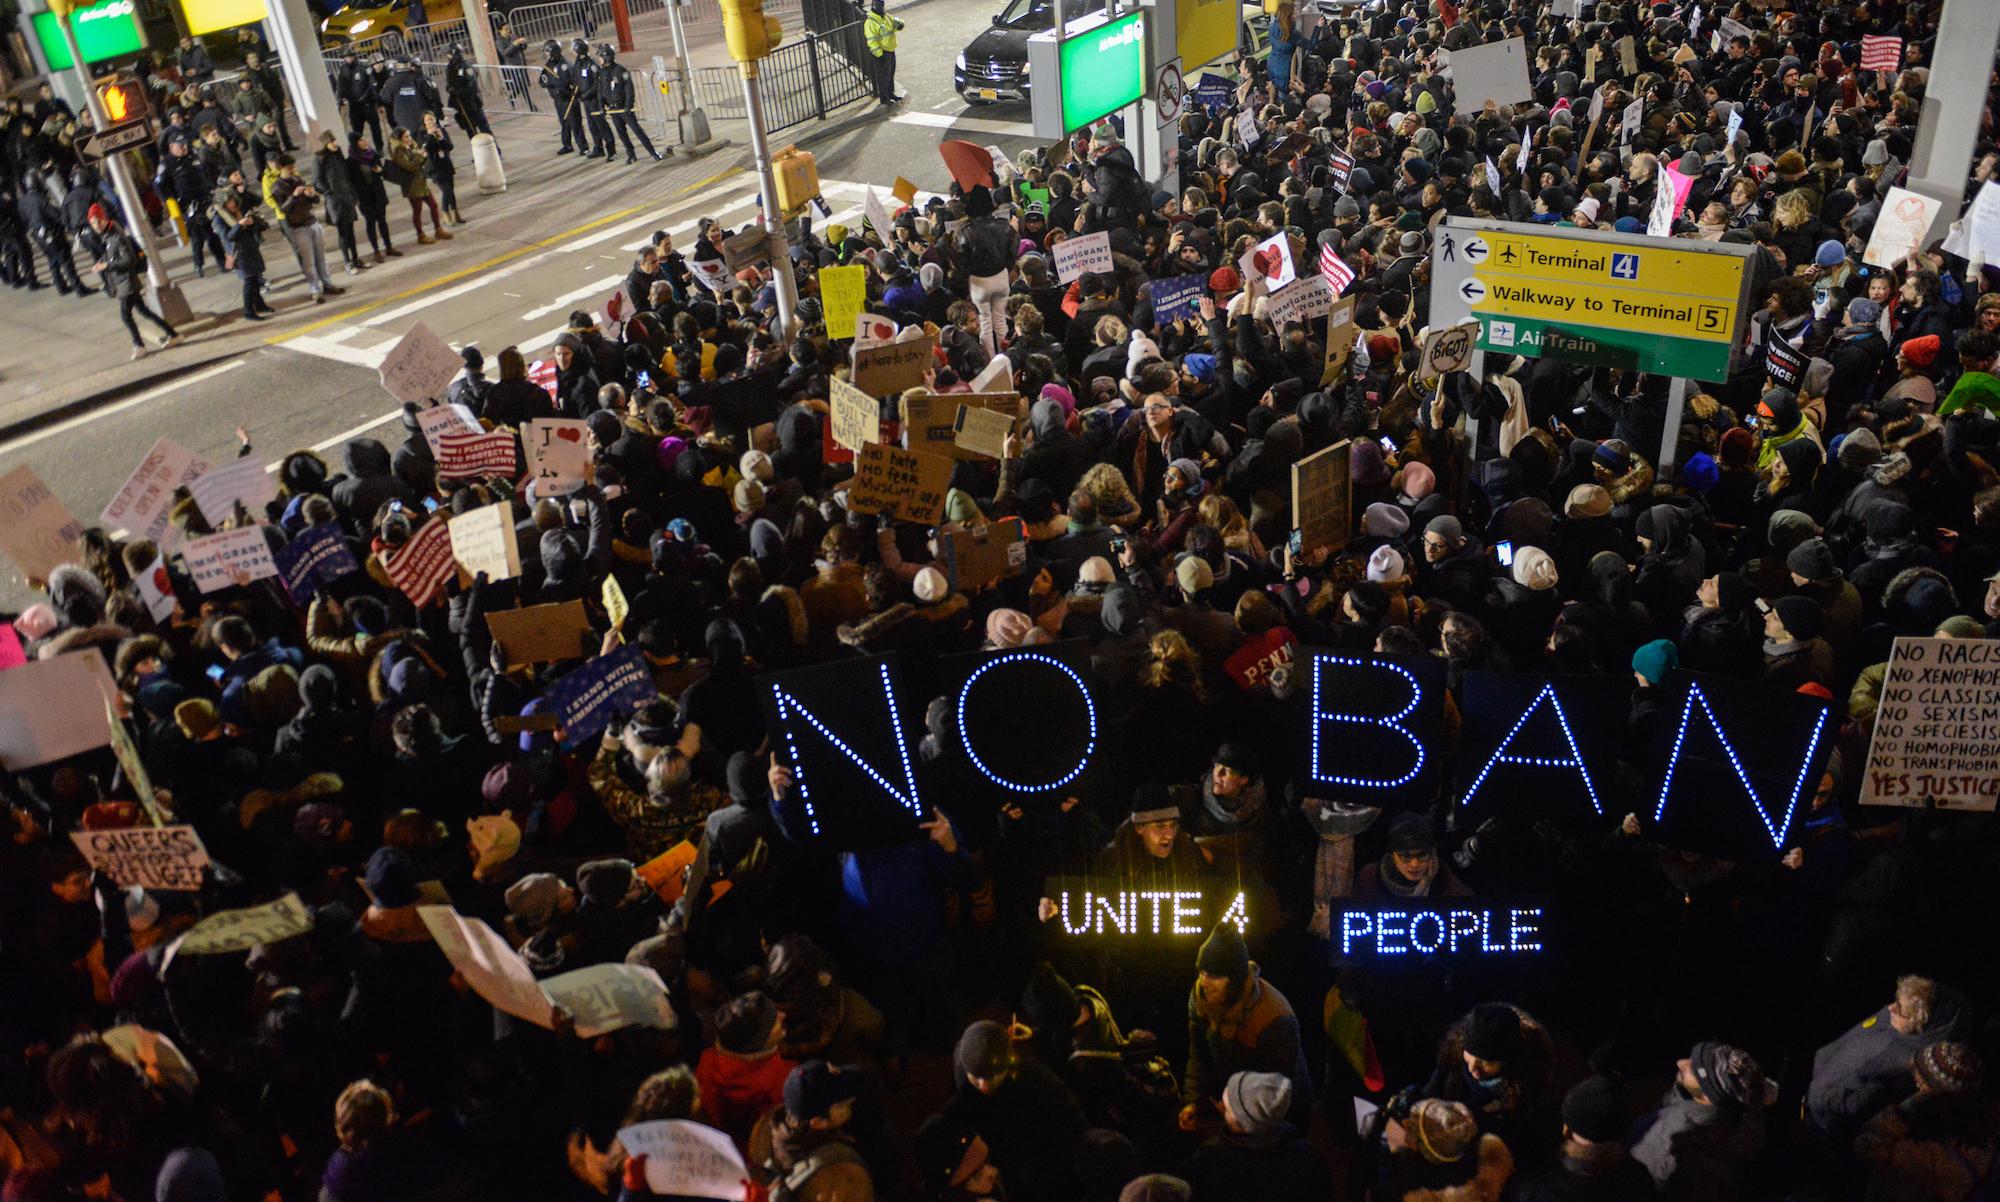 Protests outside Terminal 4 at JFK airport where two Iraqis were detained despite holding valid visas